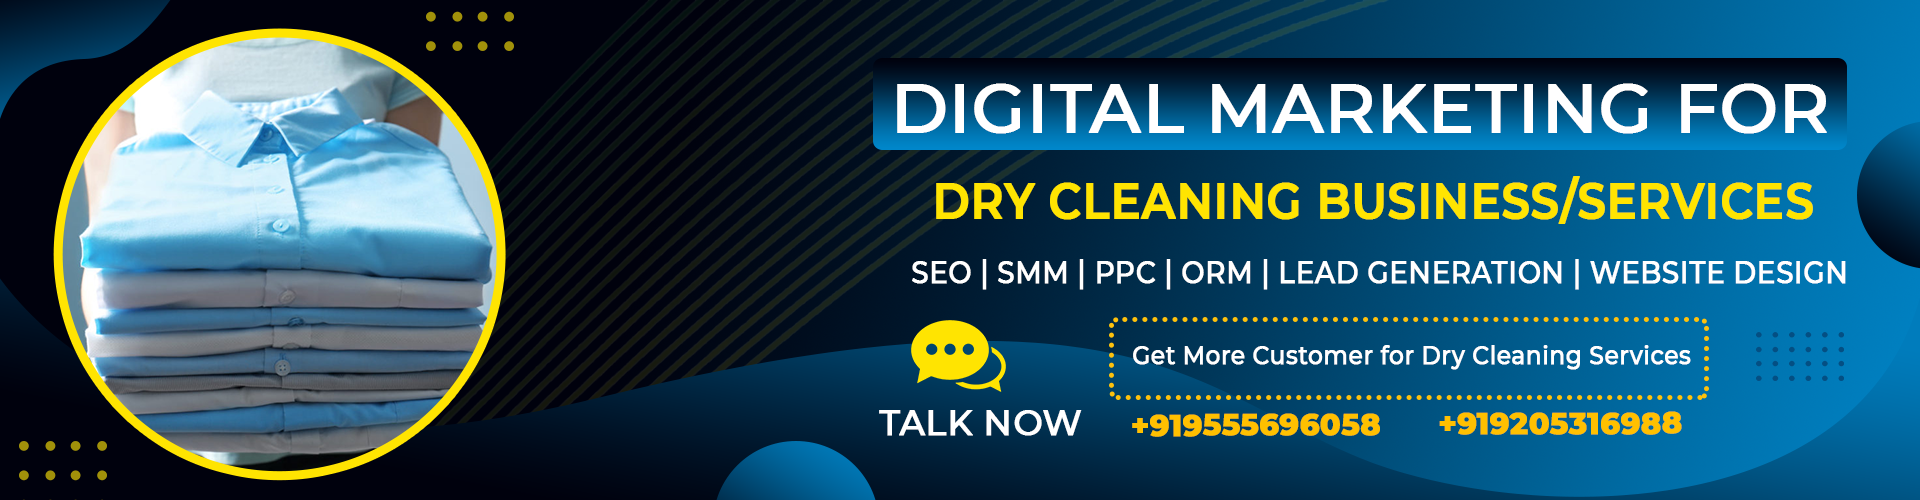 digital-marketing-for-dry-cleaning-business-services